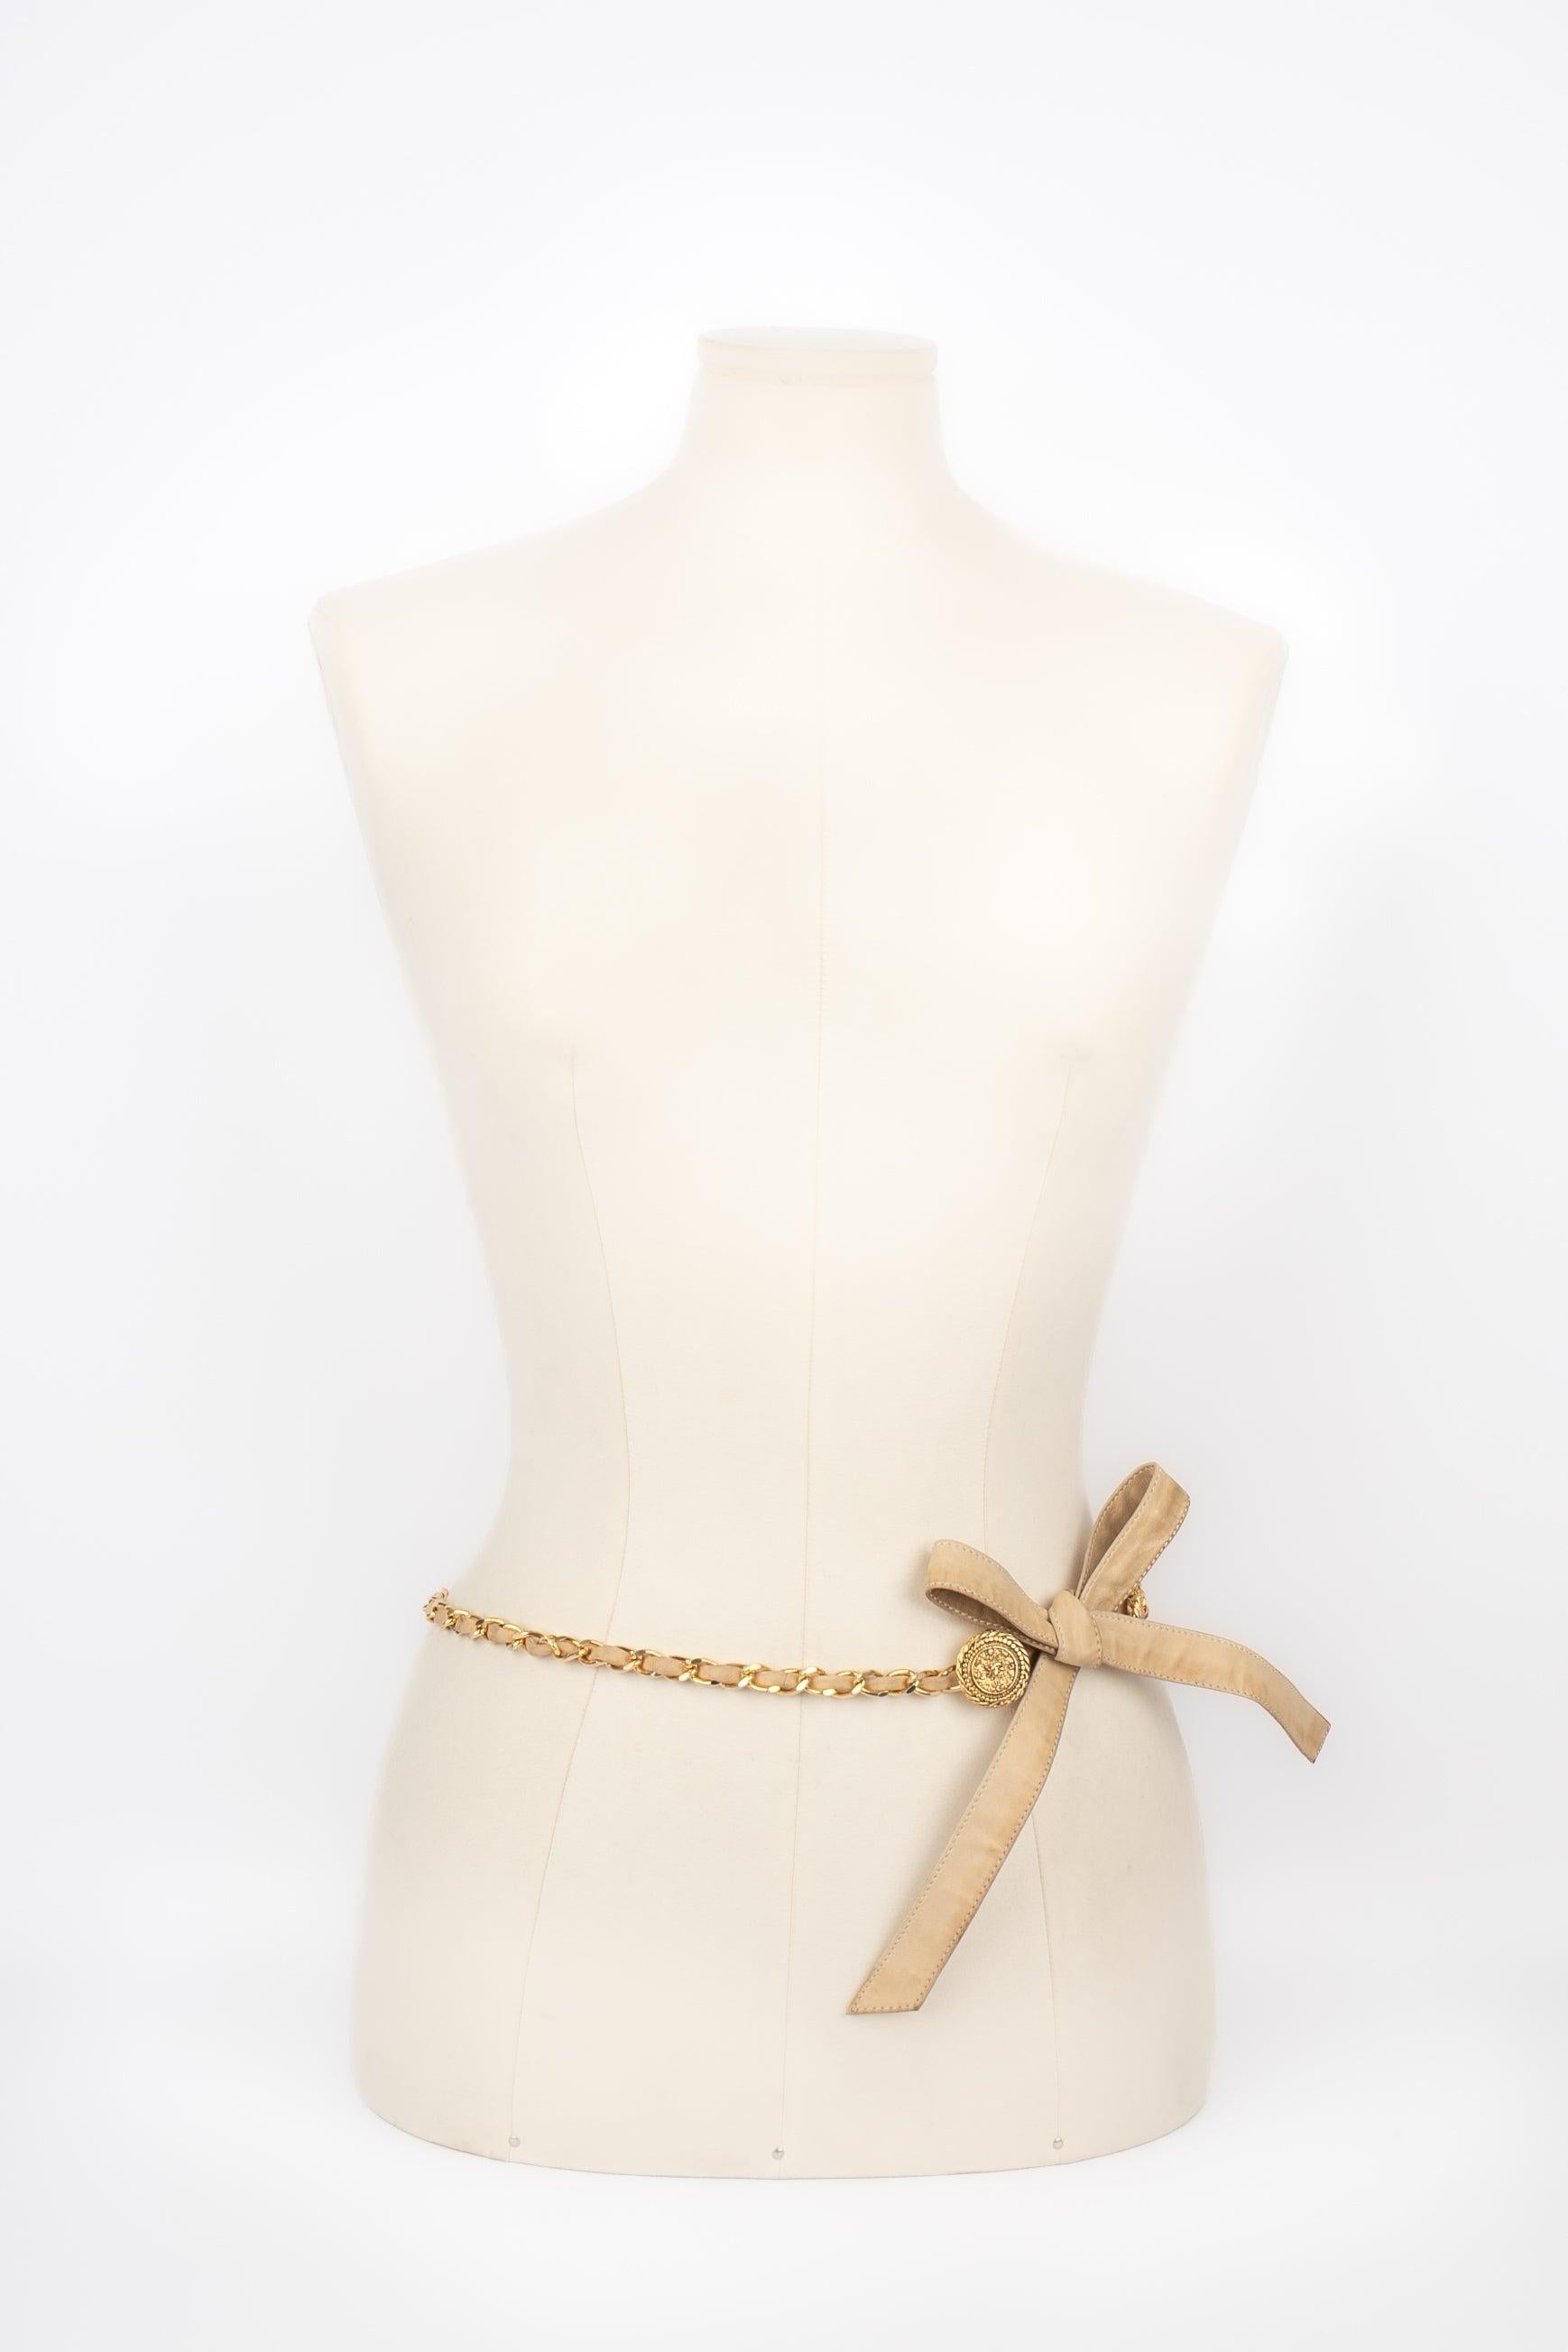 Chanel - (Made in France) Beige leather belt with golden metal. Good general condition but some stains on the leather.
 
 Additional information: 
 Condition: Good condition
 Dimensions: Length: 140 cm
 
 Seller Reference: CCB103